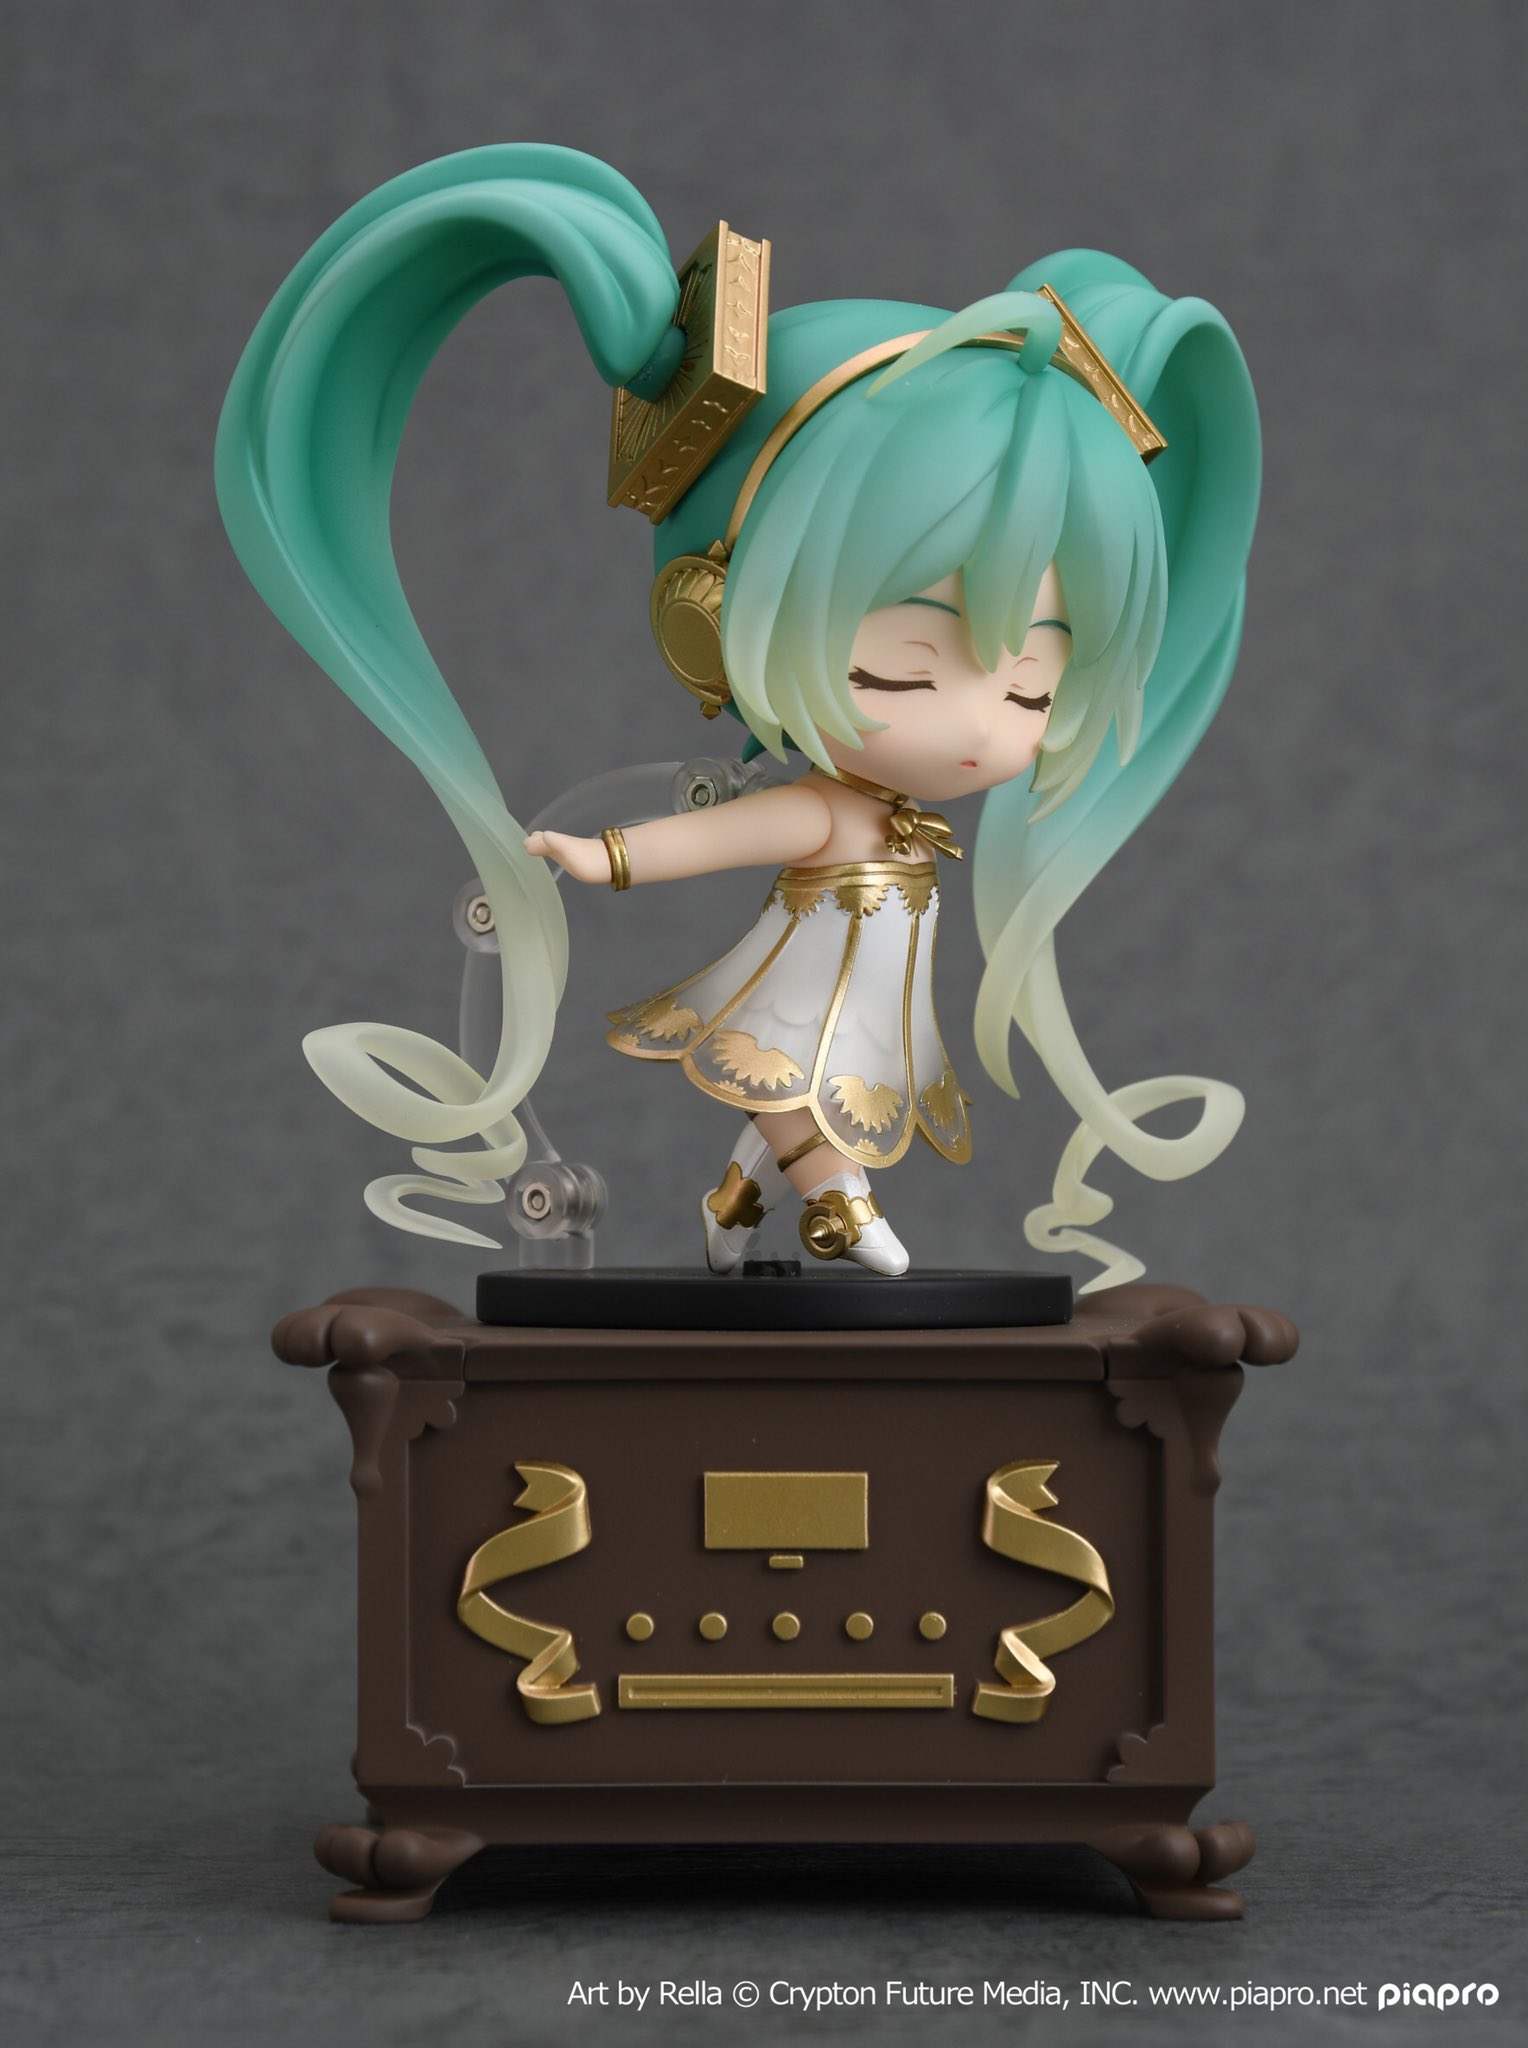 Goodsmile Us Gsc Figure Update Nendoroid Hatsune Miku Symphony 5th Anniversary Ver Painted Prototype Stay Tuned For More Info Coming Soon Hatsunemiku Nendoroid Goodsmile T Co Bwdhxmx3aa Twitter